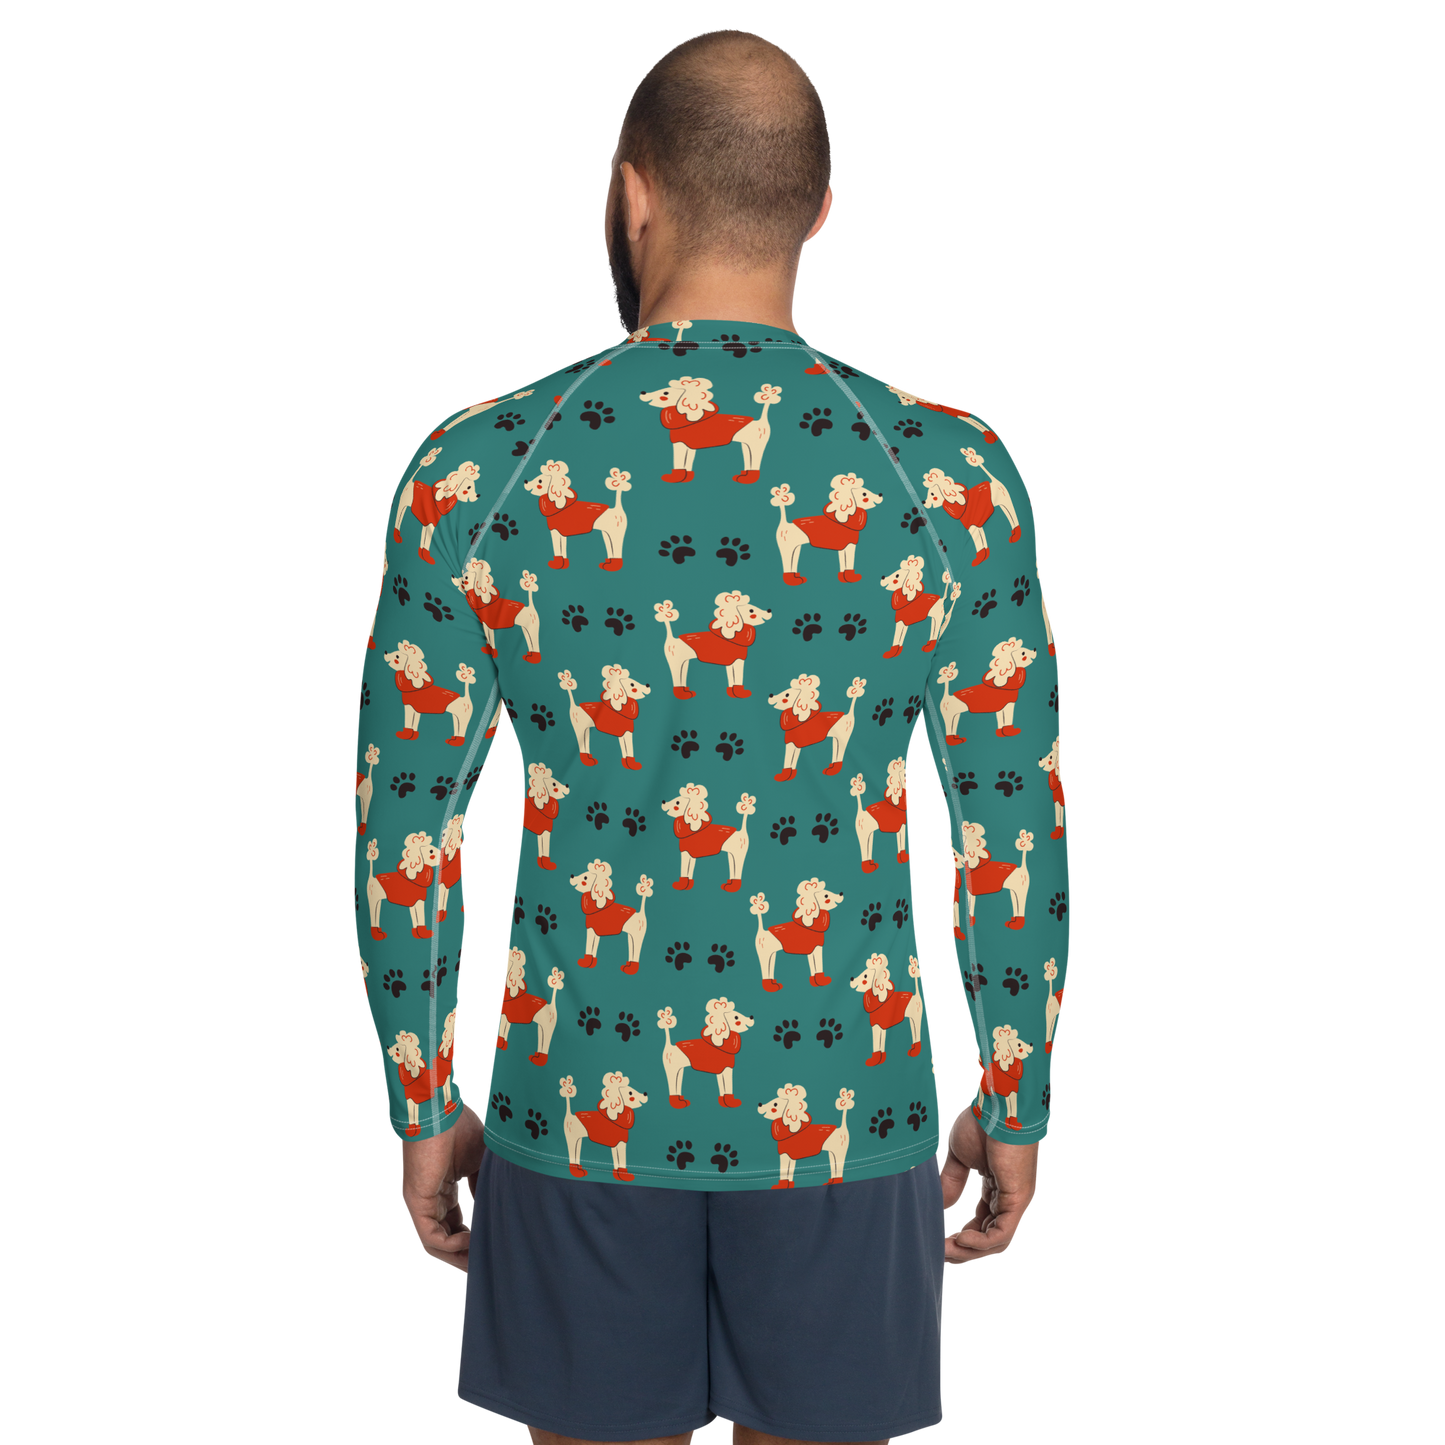 Cozy Dogs | Seamless Patterns | All-Over Print Men's Rash Guard - #1